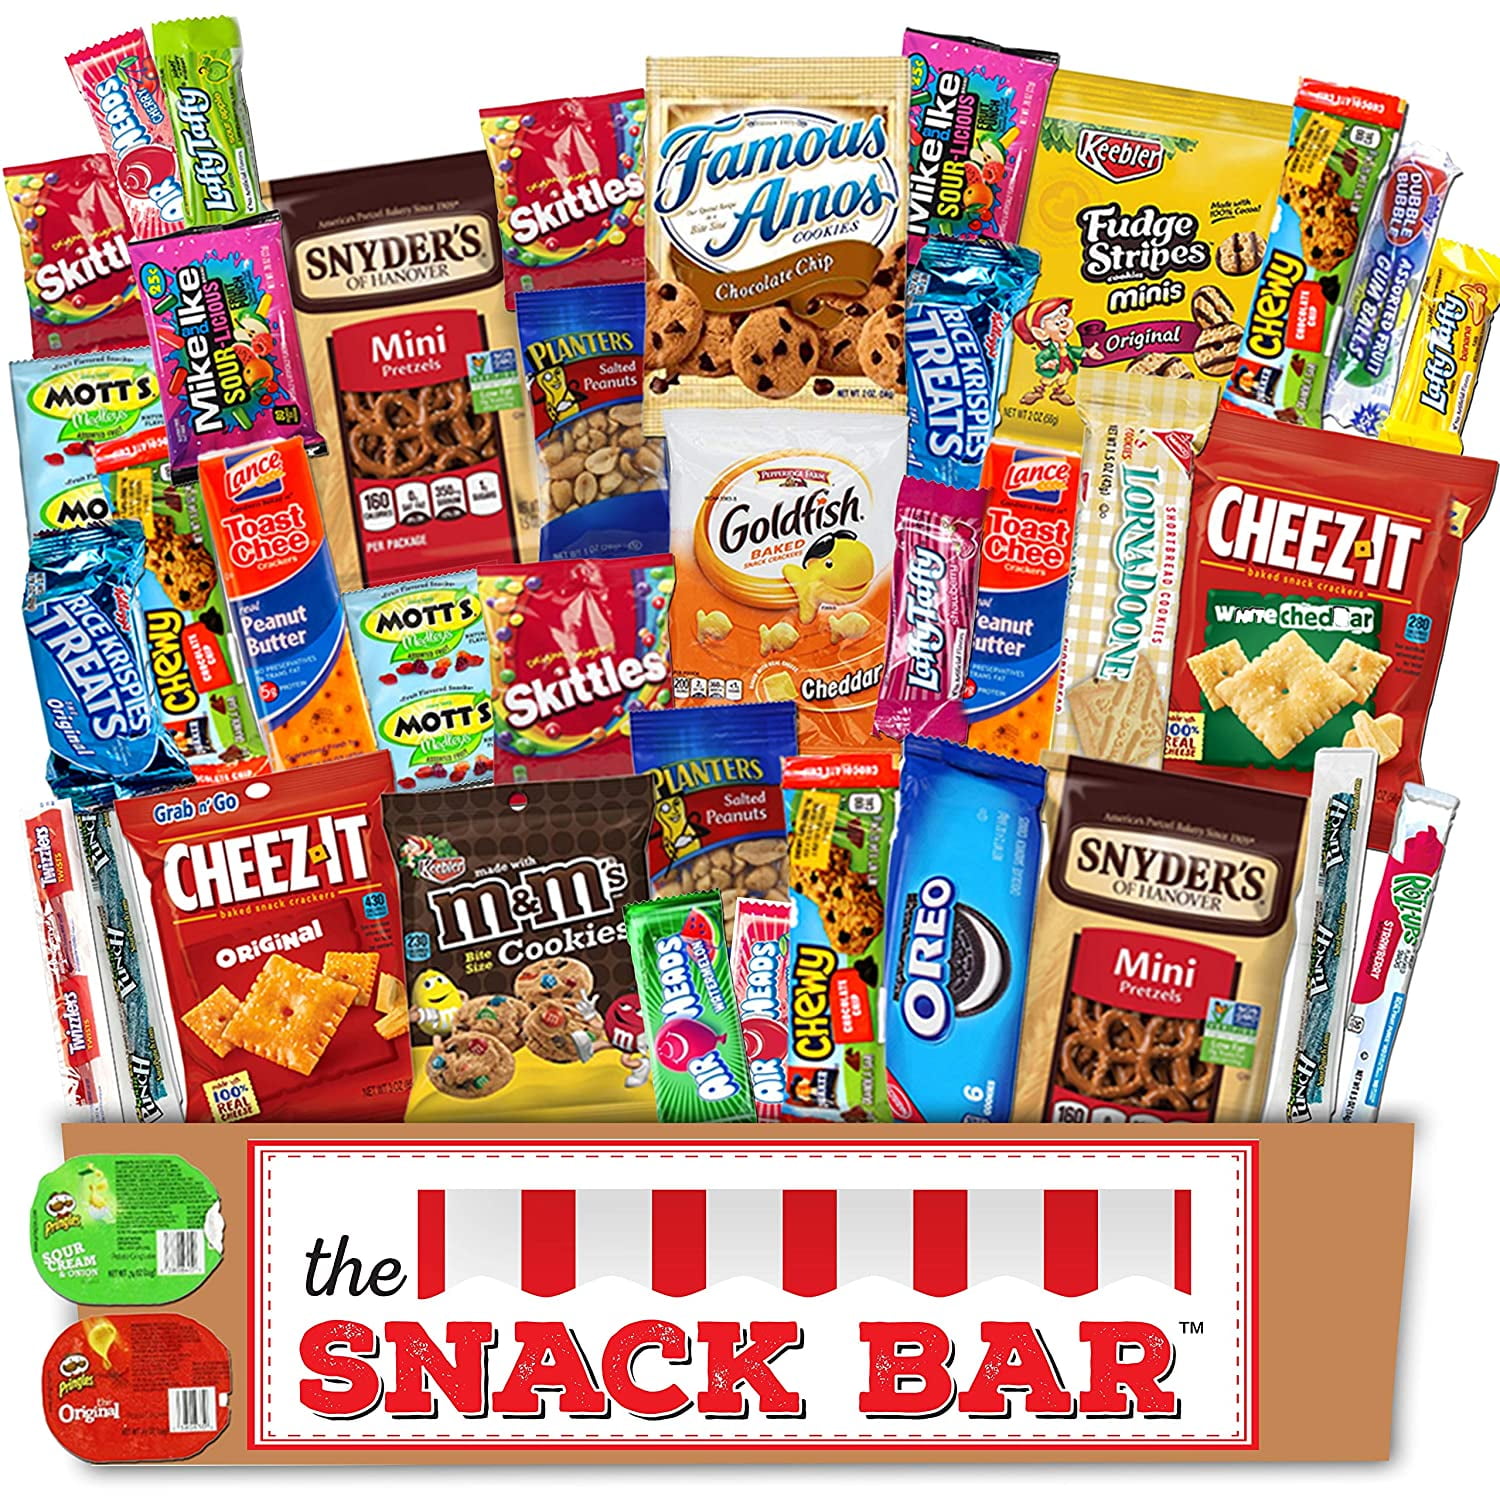 The Snack Bar - Snack Care Package (40 count) - Variety Assortment with  American Candy, Fruit Snacks, Gift Snack Box for Lunches, Office, College